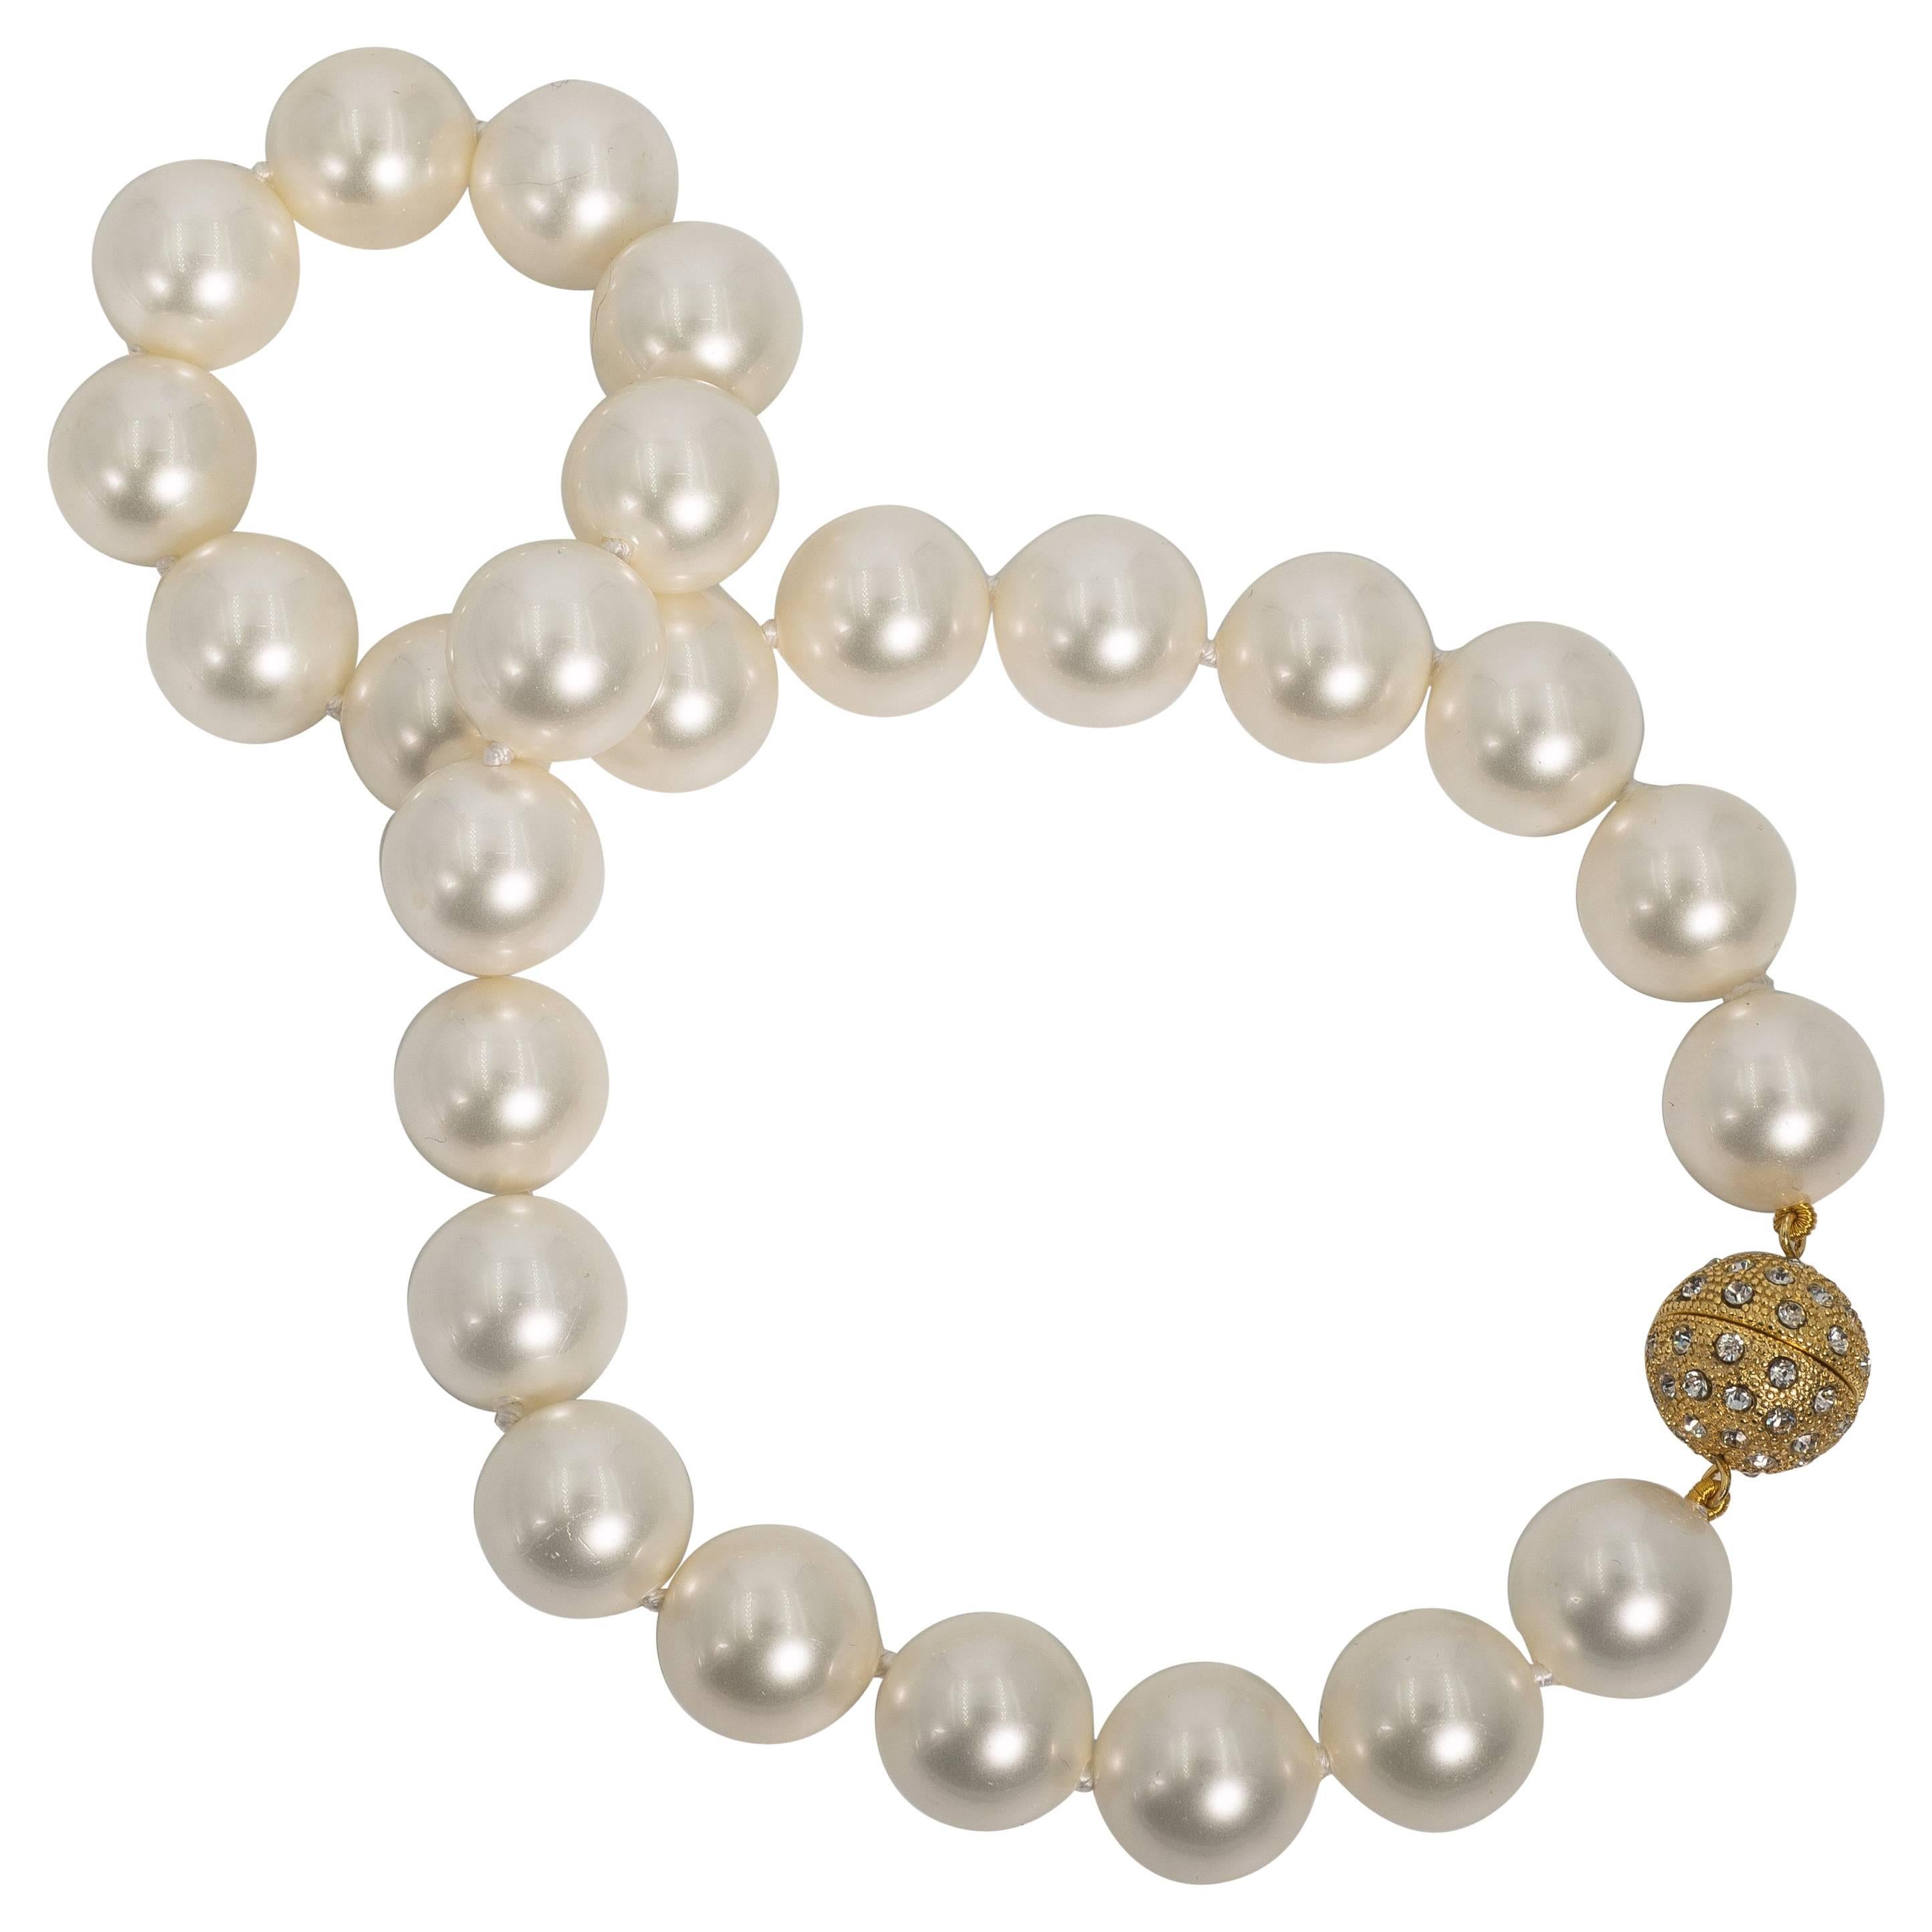 For Day And Night  Real Looking  Strand of 14mm Wonderful Faux Pearls